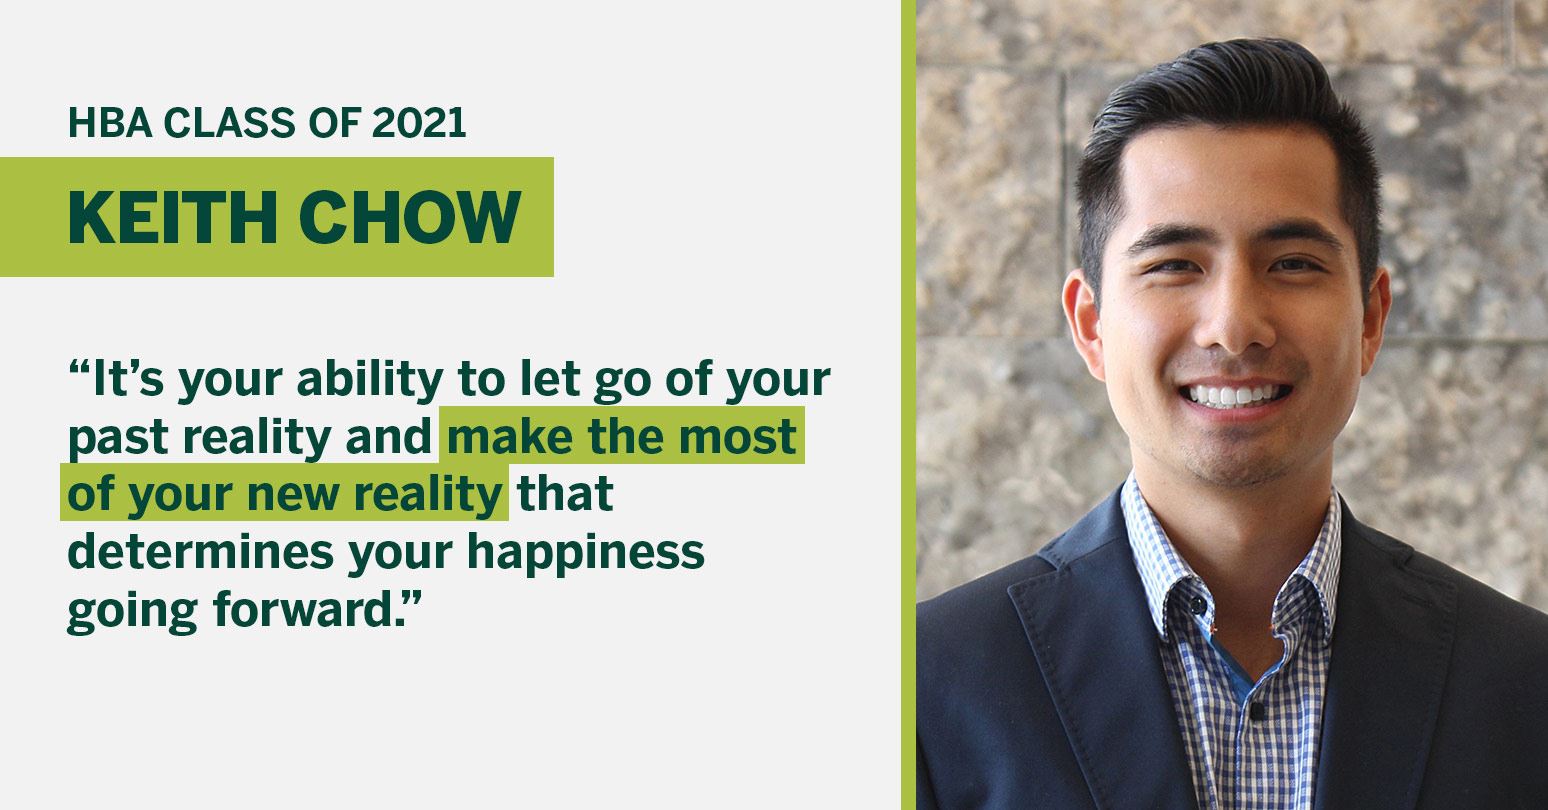 HBA Class of 2021 Keith Chow “It’s your ability to let go of your past reality and make the most of your new reality that determines your happiness going forward.”